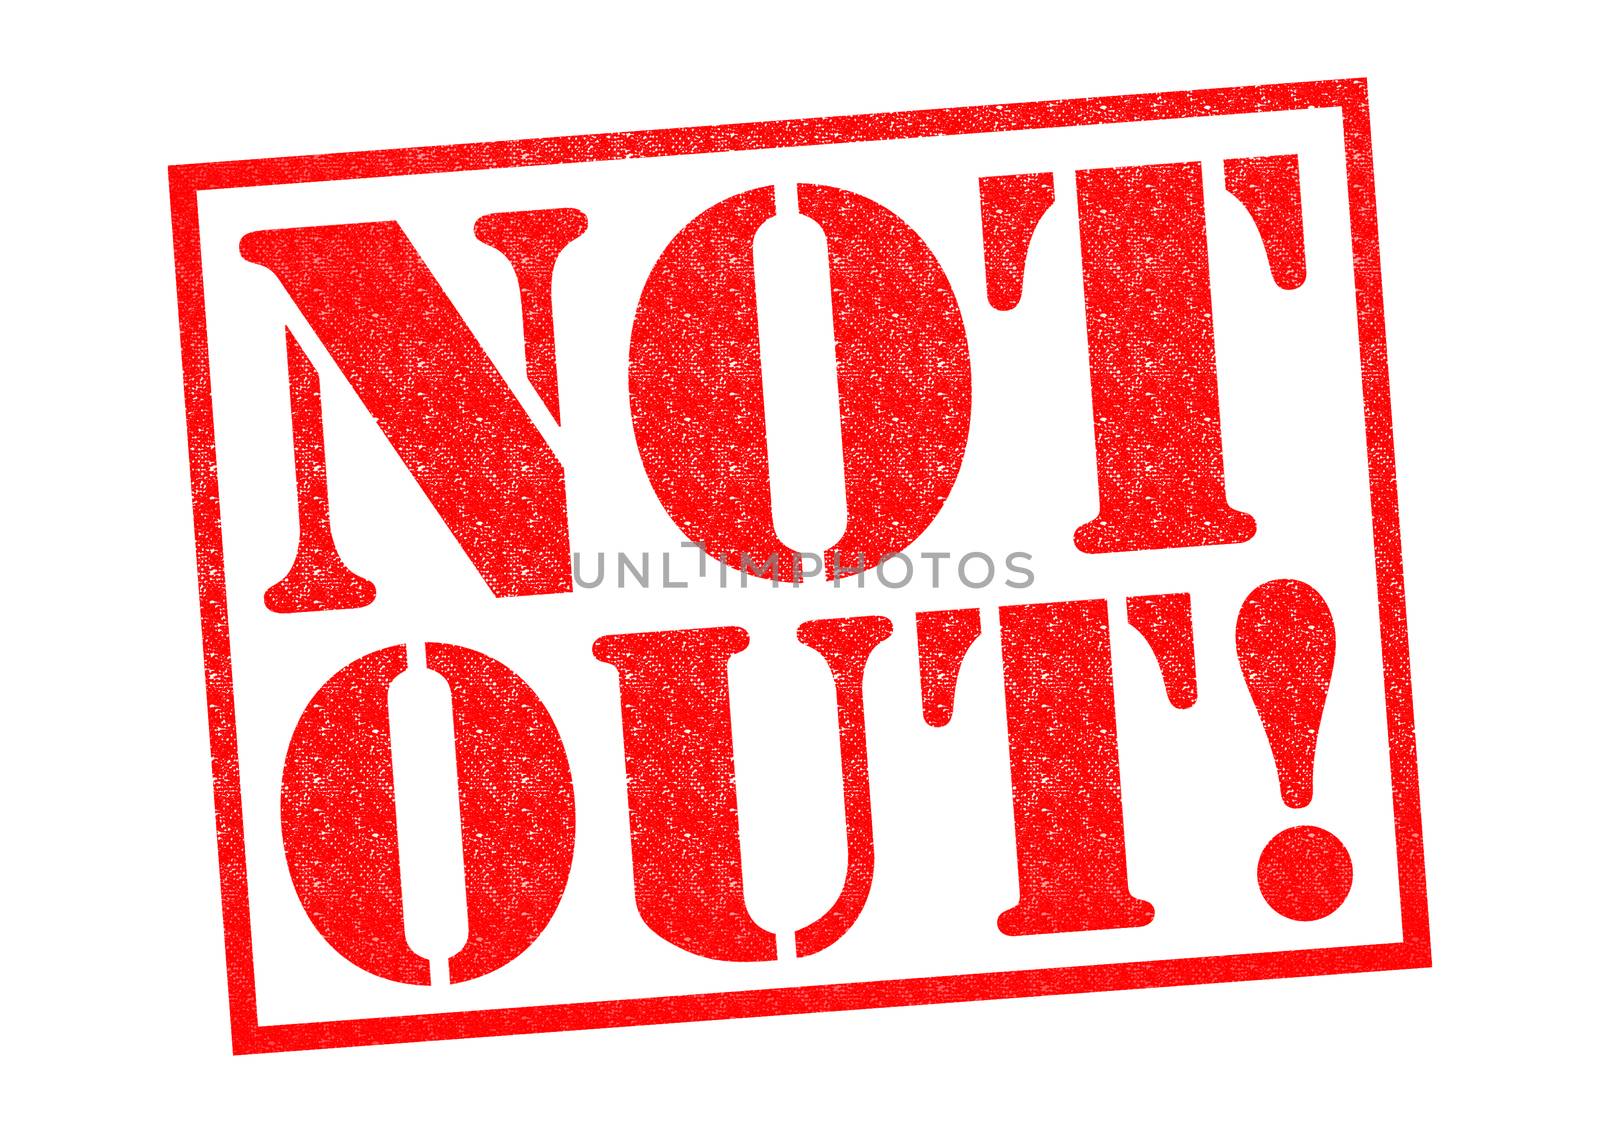 NOT OUT! red Rubber Stamp over a white background.